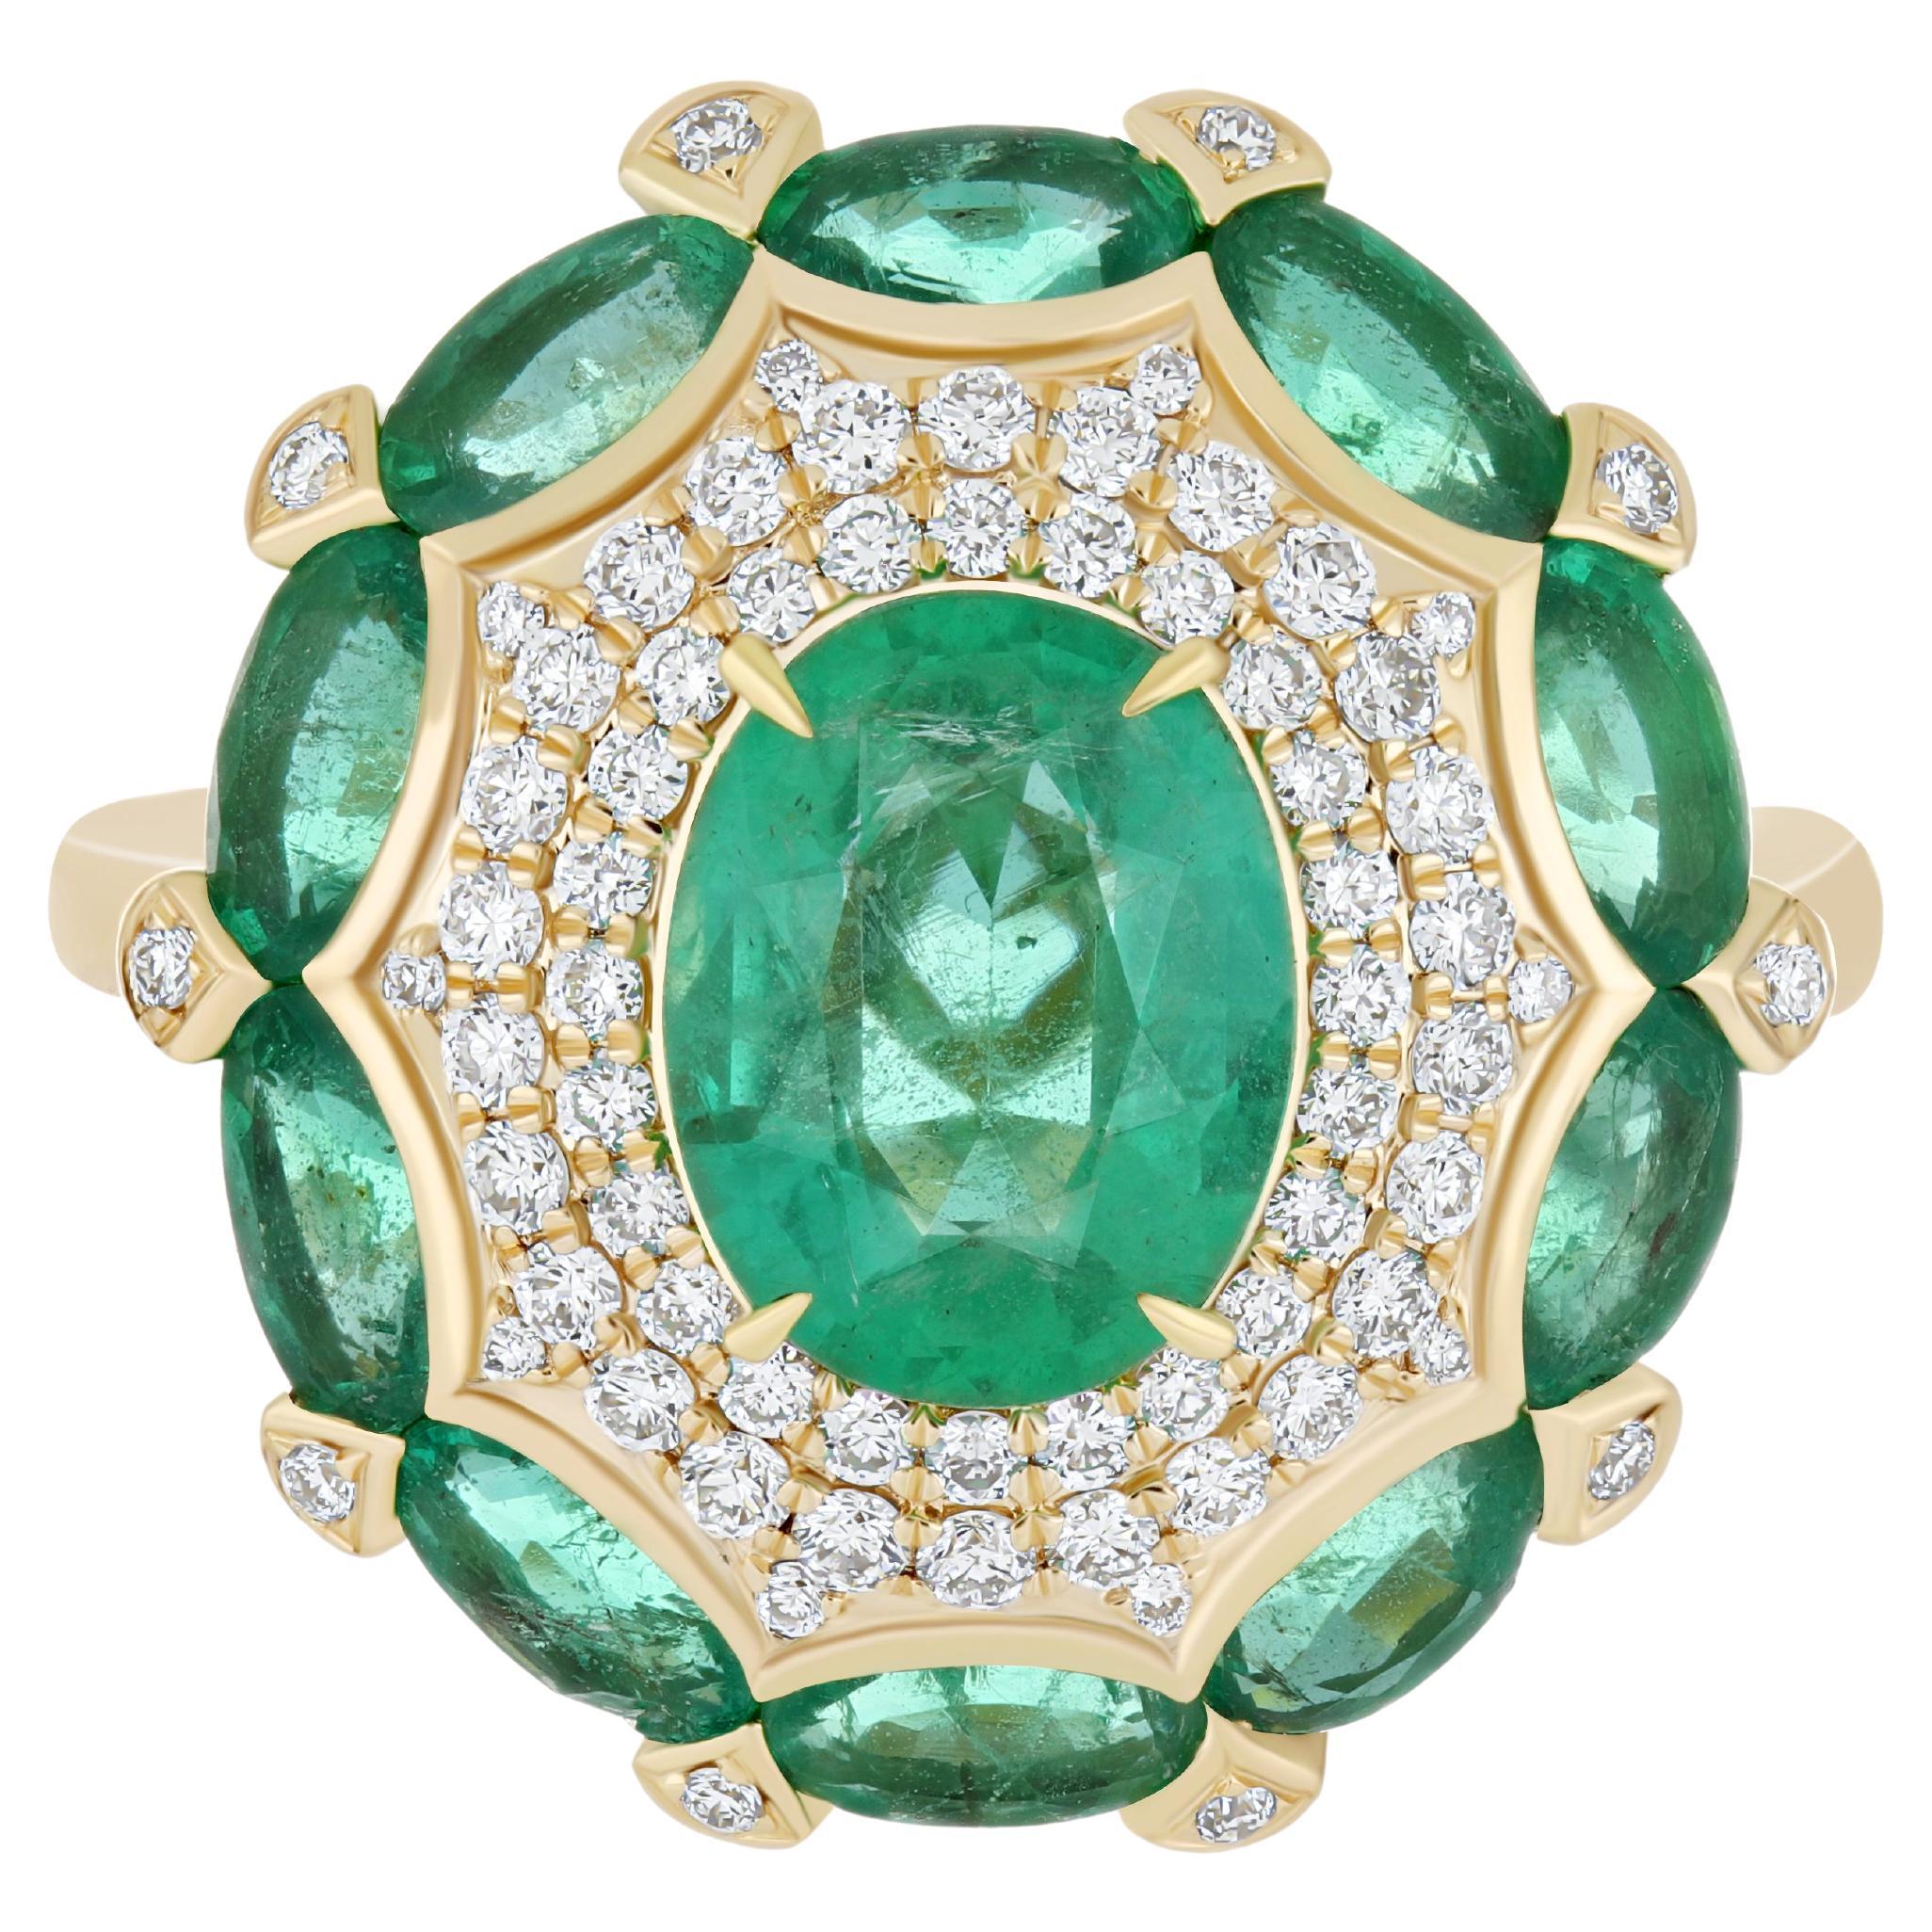 Emerald and Diamond Studded Hand-Crafted Ring in 14 Karat Yellow Gold Flower